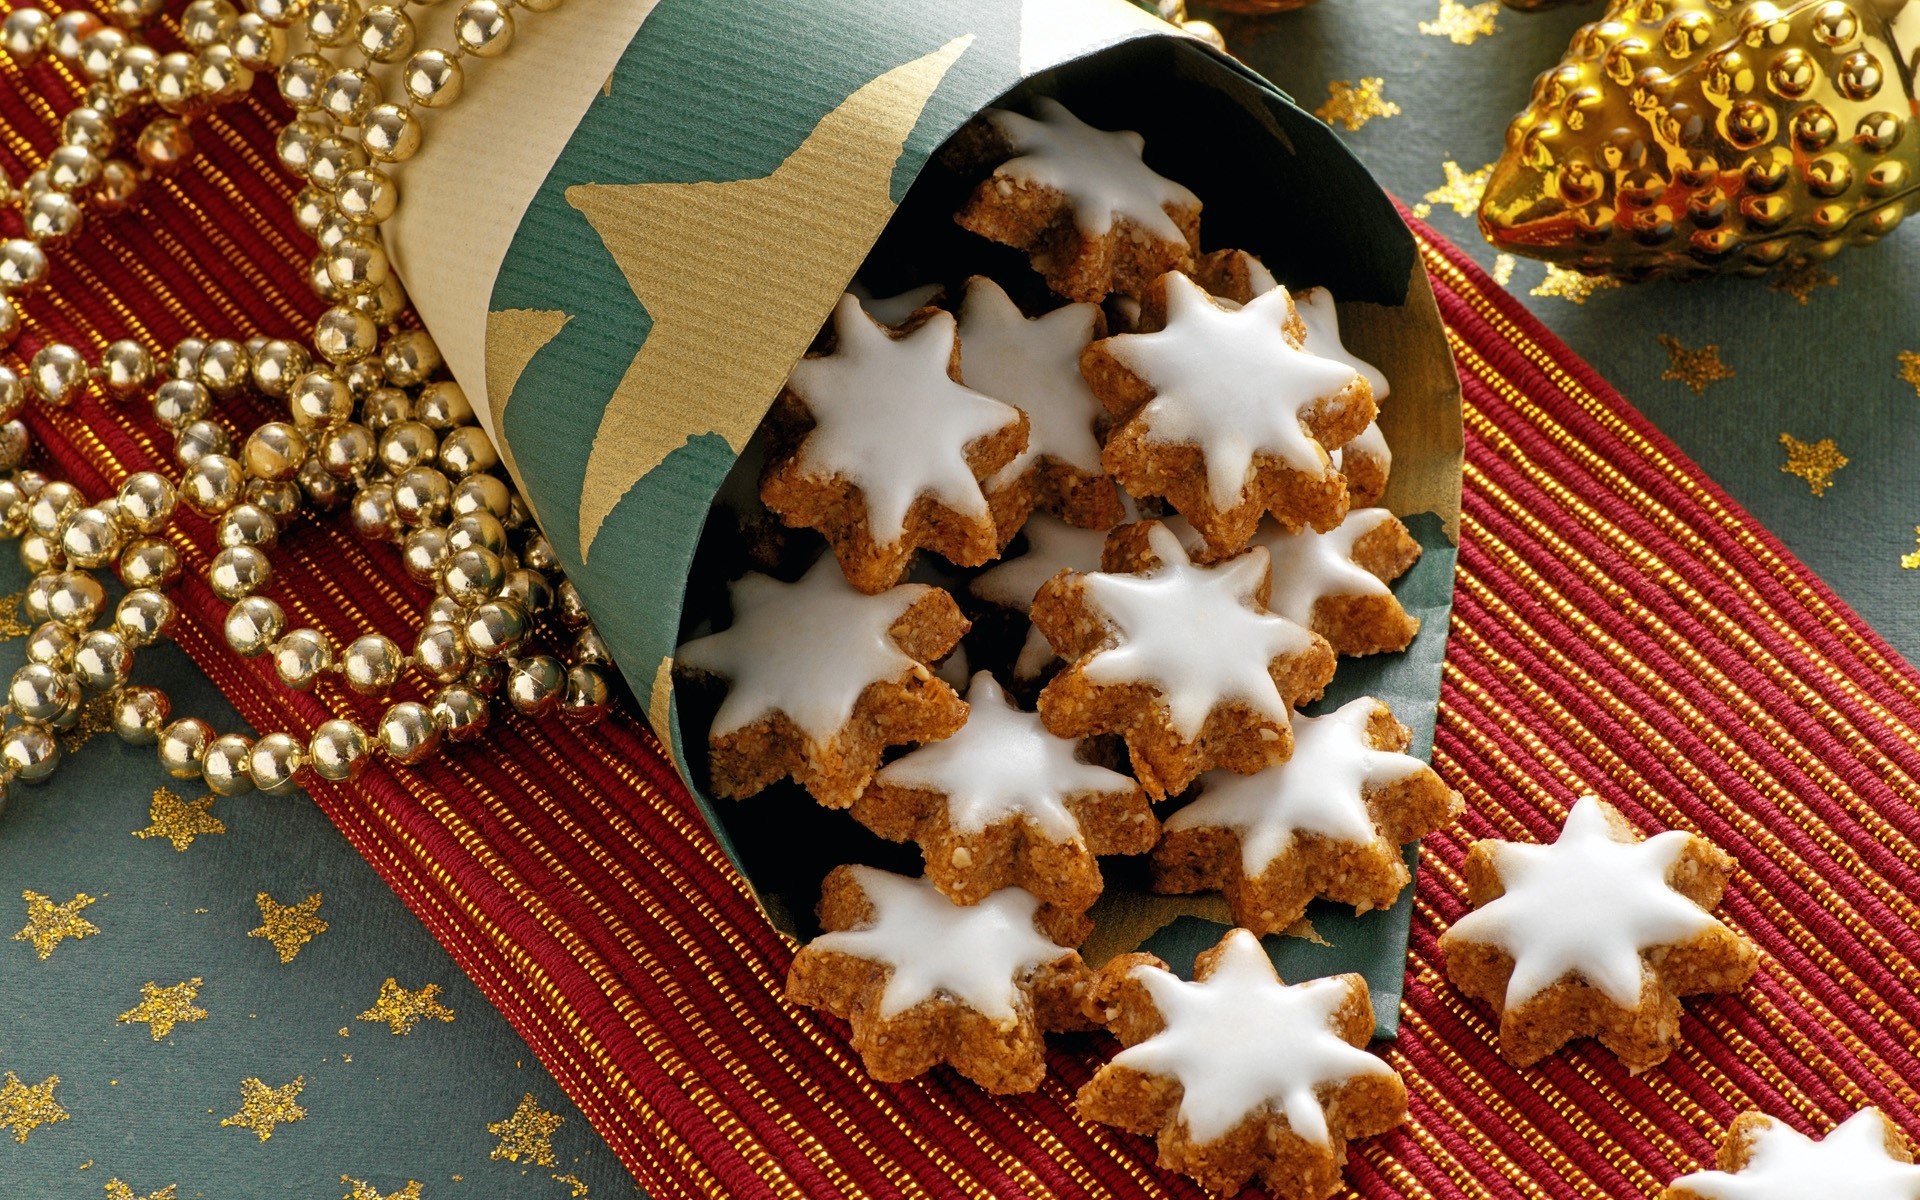 1920x1200 Cookies, Christmas, Baking, Icing, Candy, Dessert, New year, Holidays,  Toys, Beads wallpaper and background